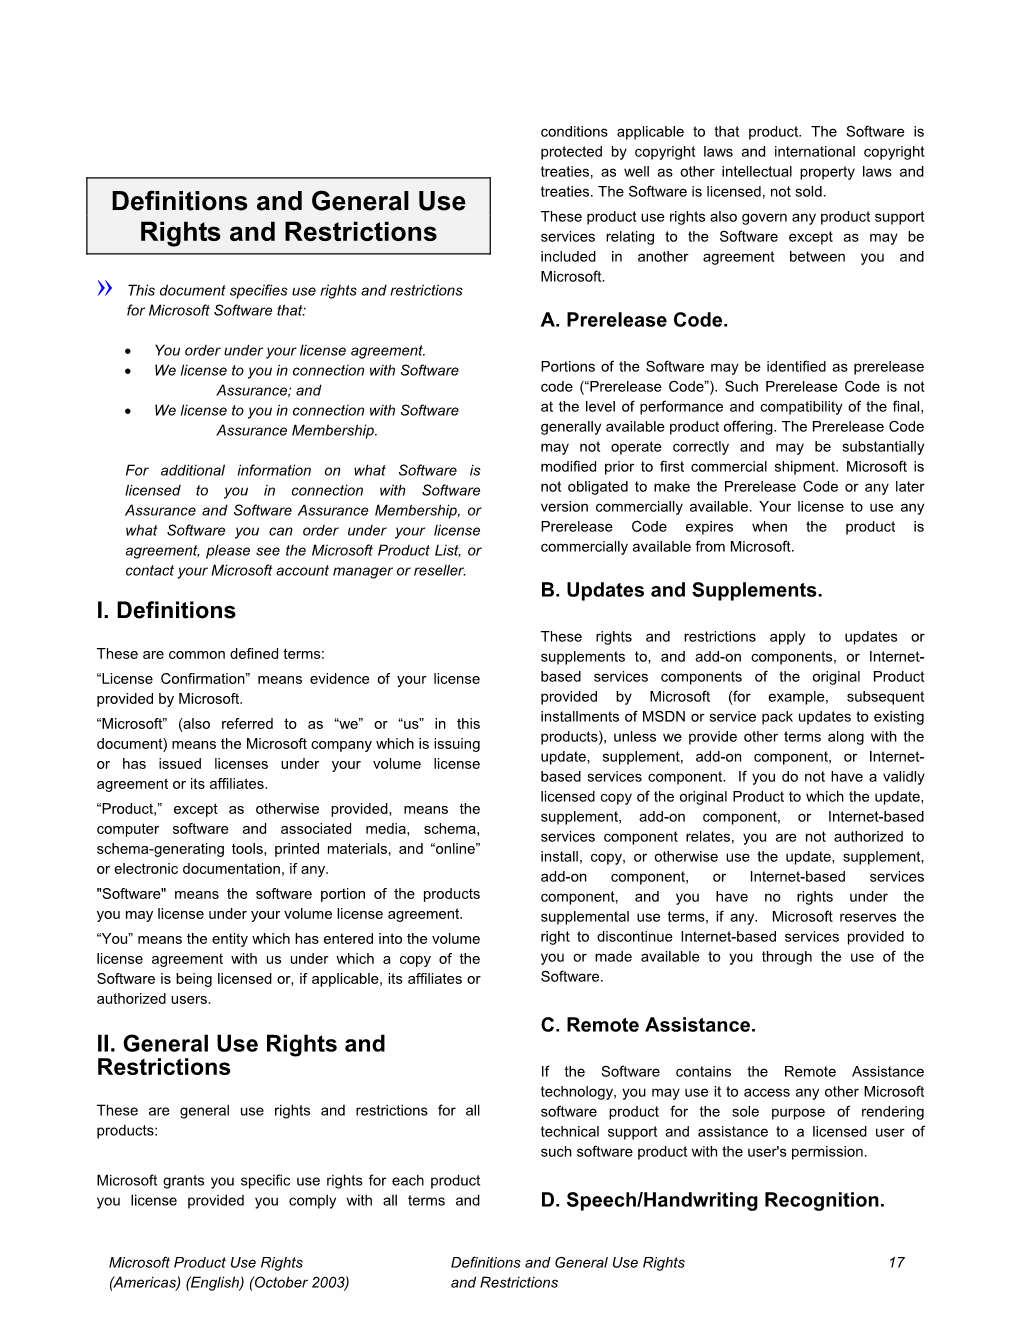 Microsoft Product Use Rights Definitions and General Use Rights 17 (Americas) (English) (October 2003) and Restrictions